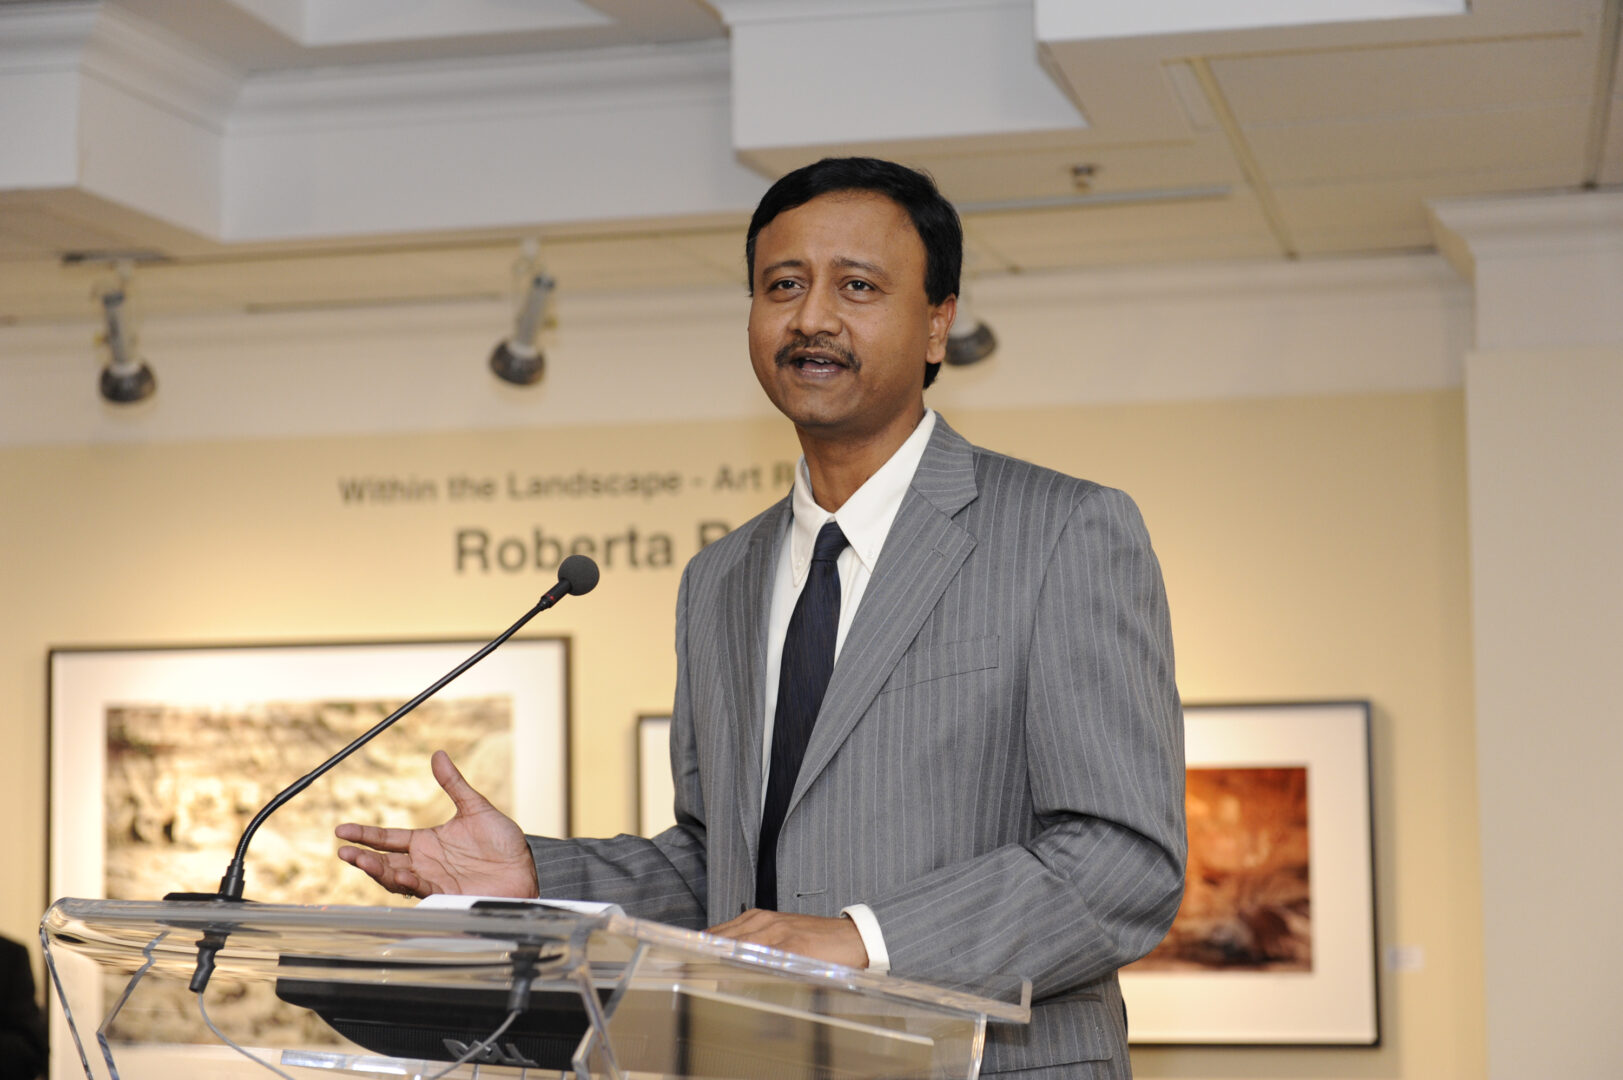 Kalyan Ghosh, Chief Commercial Officer, Essar Steel Algoma Inc. addresses gallery patrons at The Roberta Bondar Foundation's first Traveling Exhibition and Learning Experience